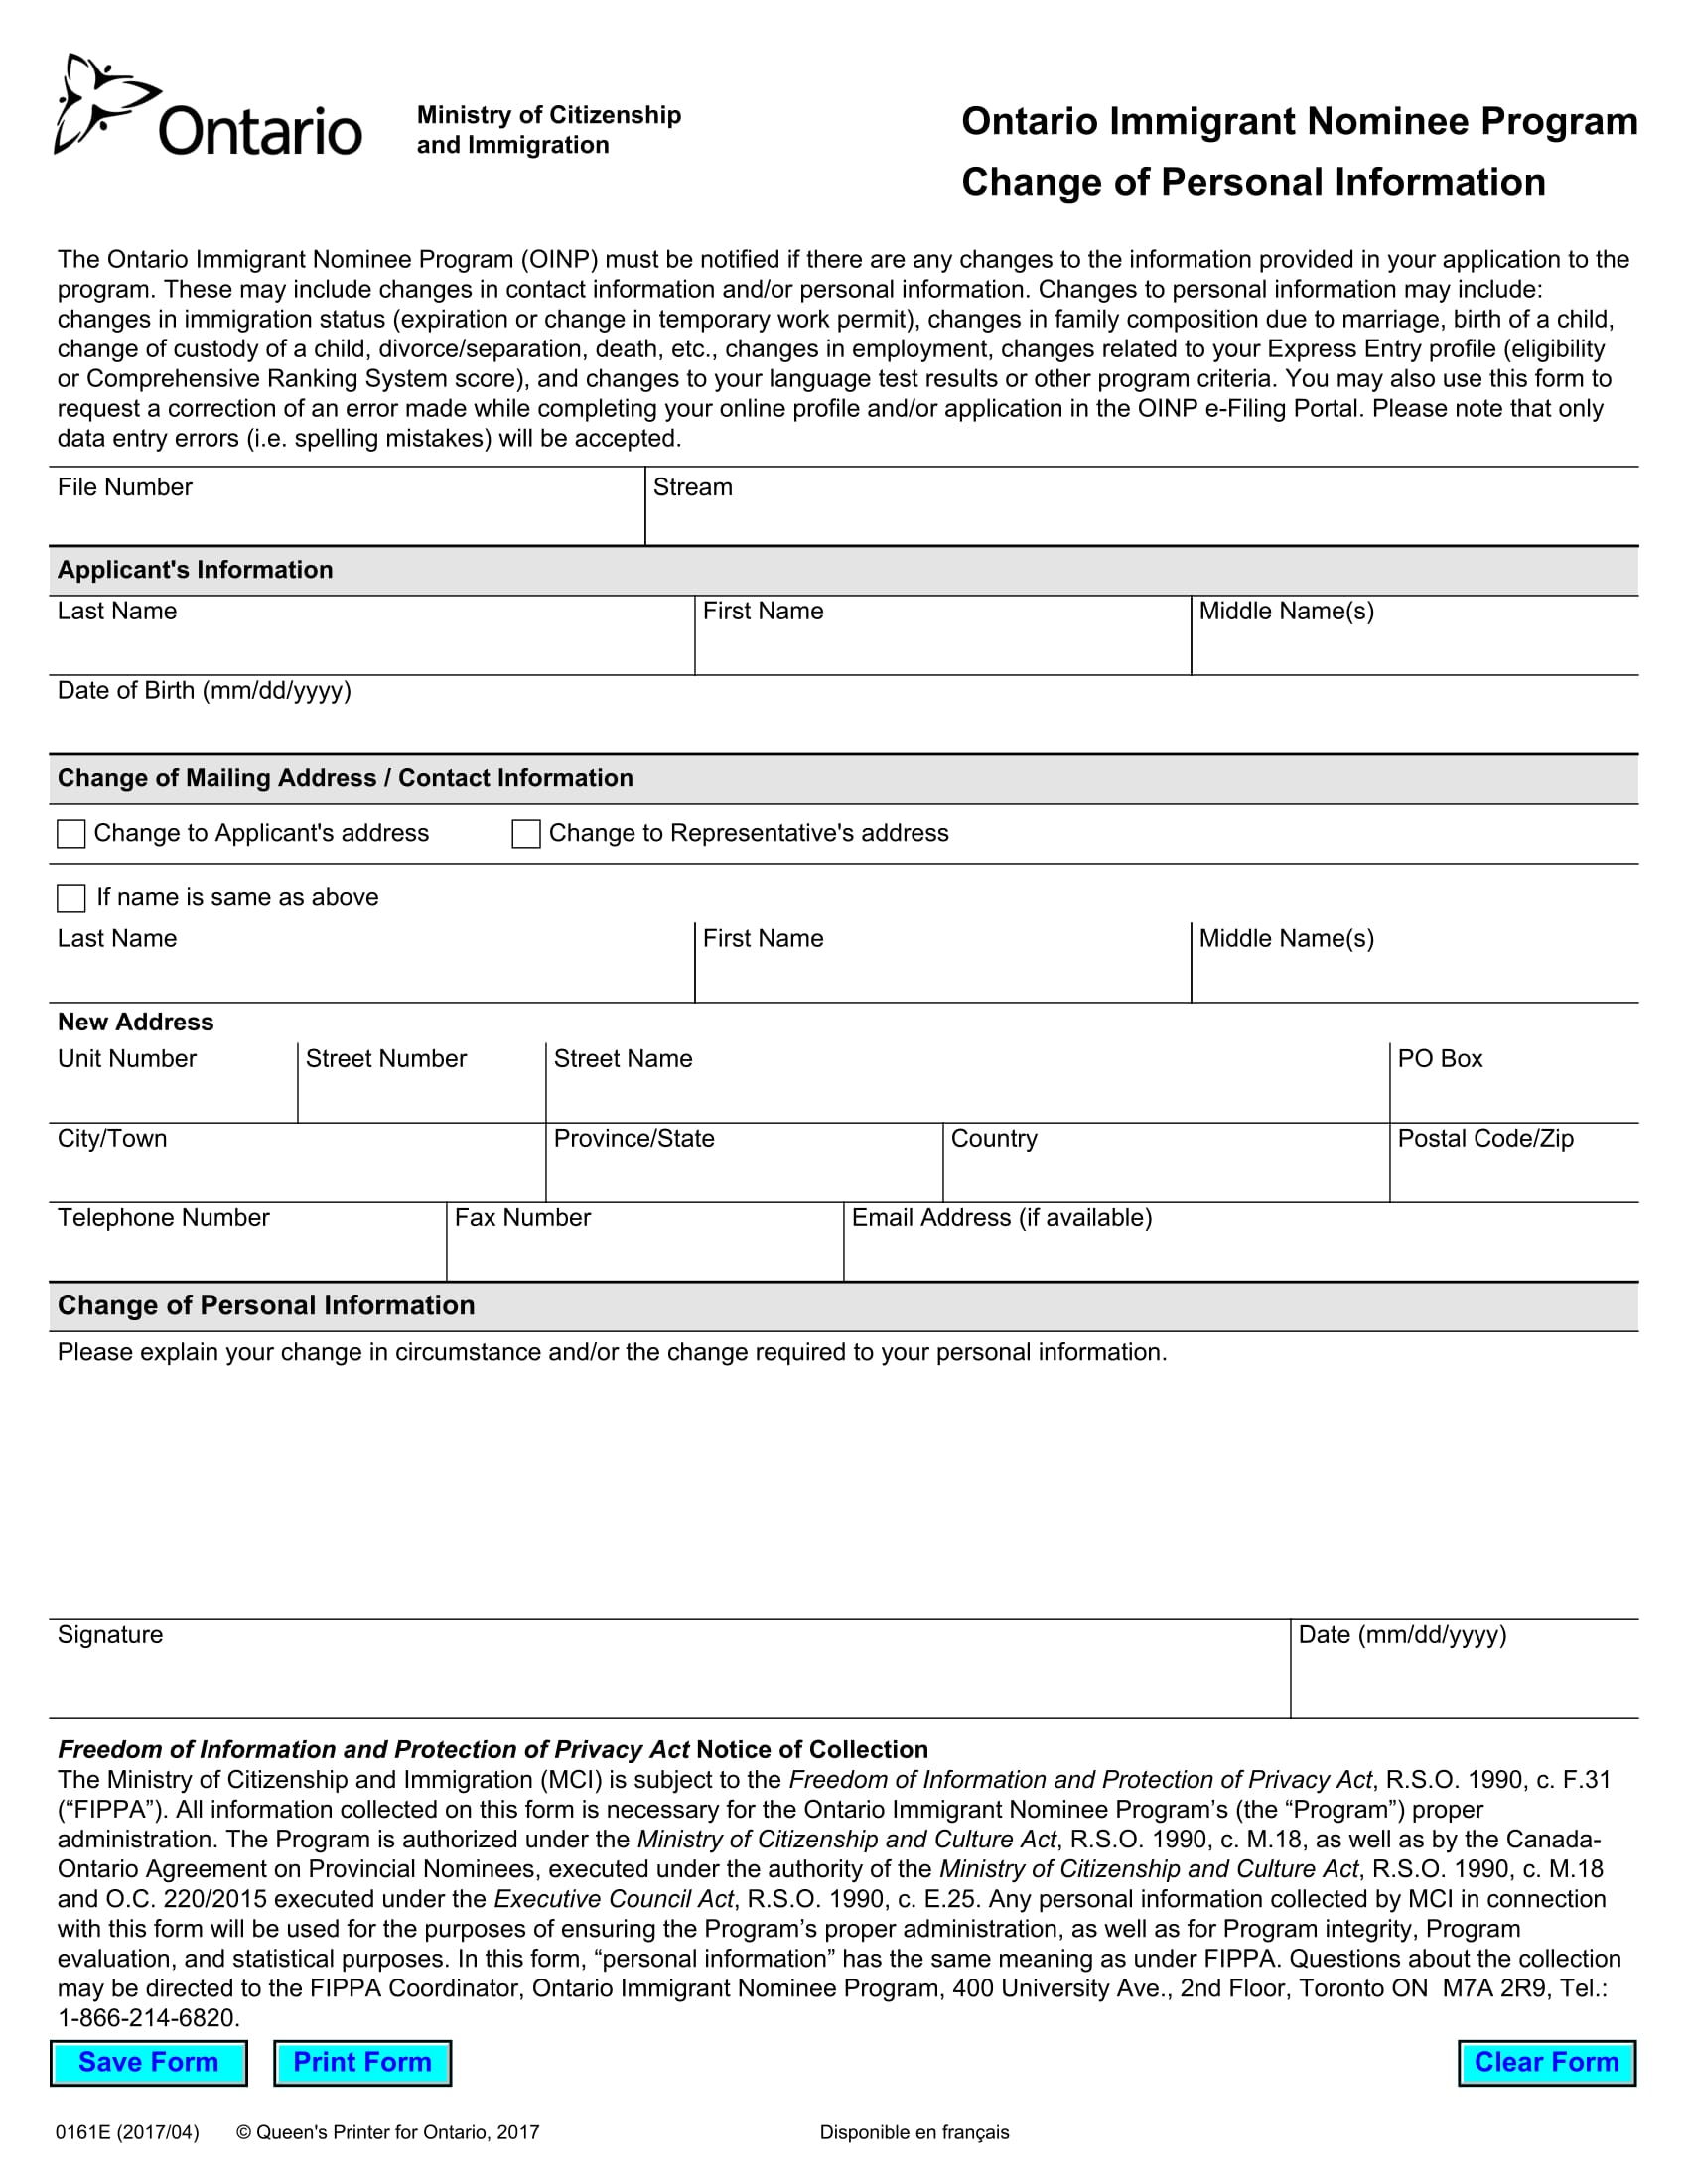 cic gc ca application forms